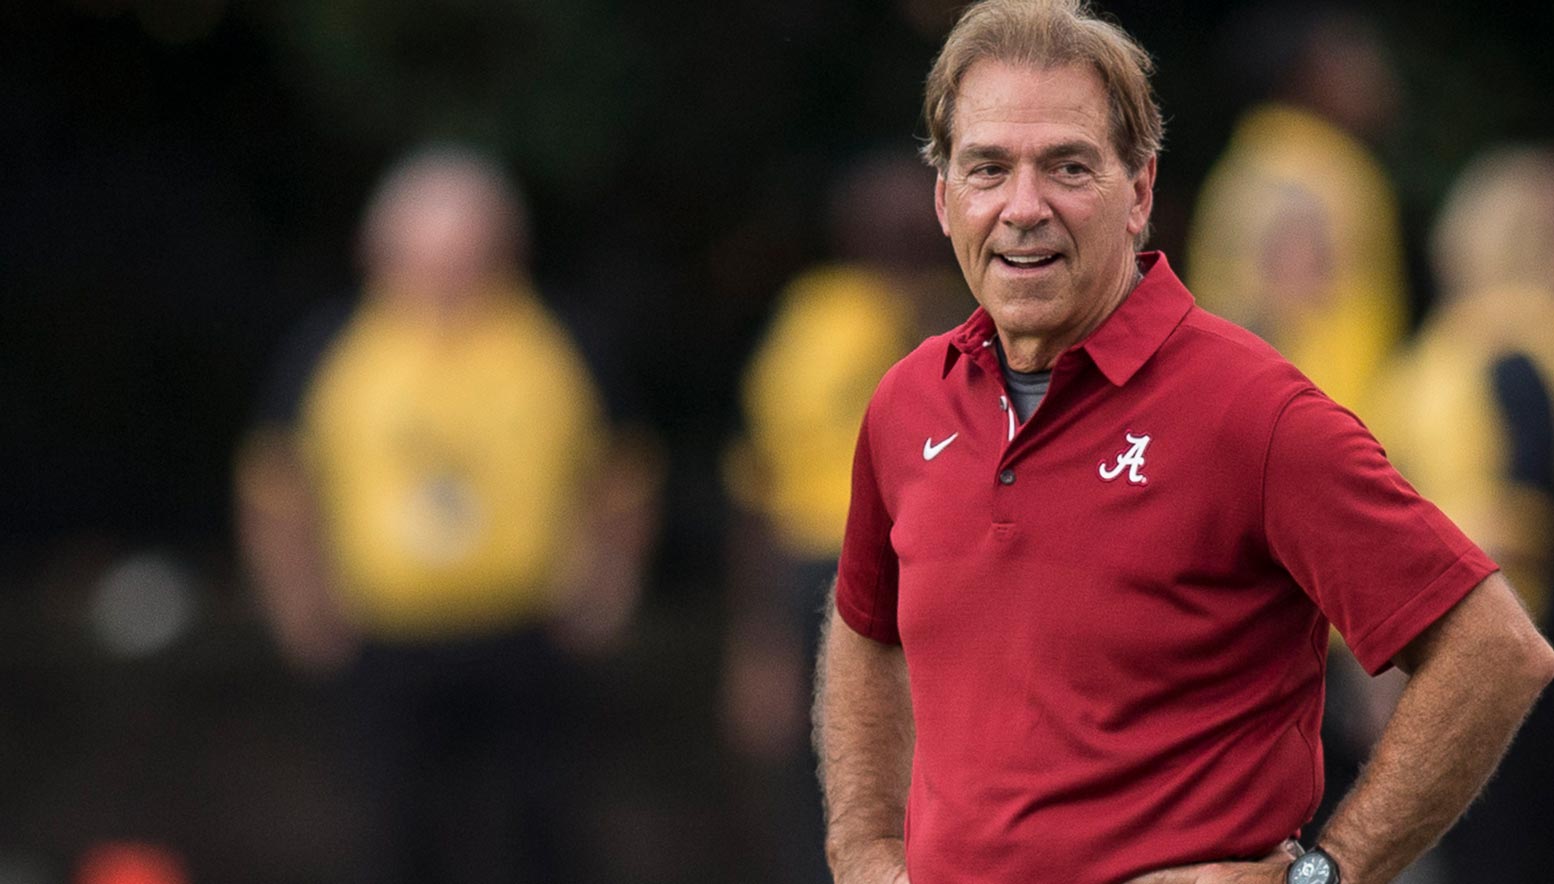 Lang’s World: Nick Saban has done it all. Now what?